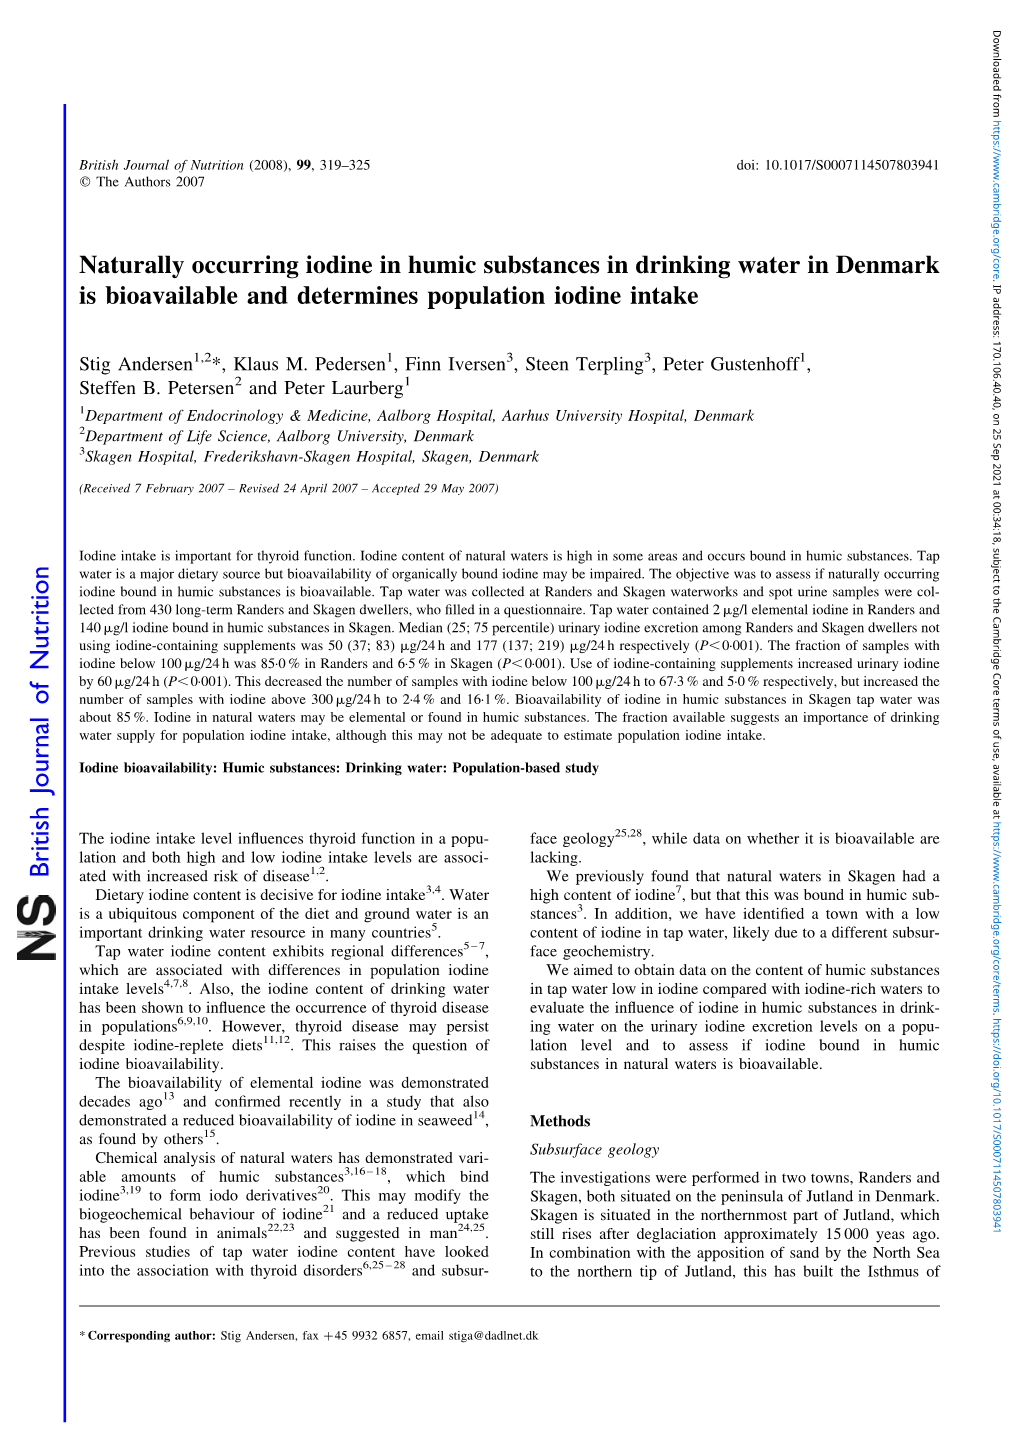 Naturally Occurring Iodine in Humic Substances in Drinking Water in Denmark